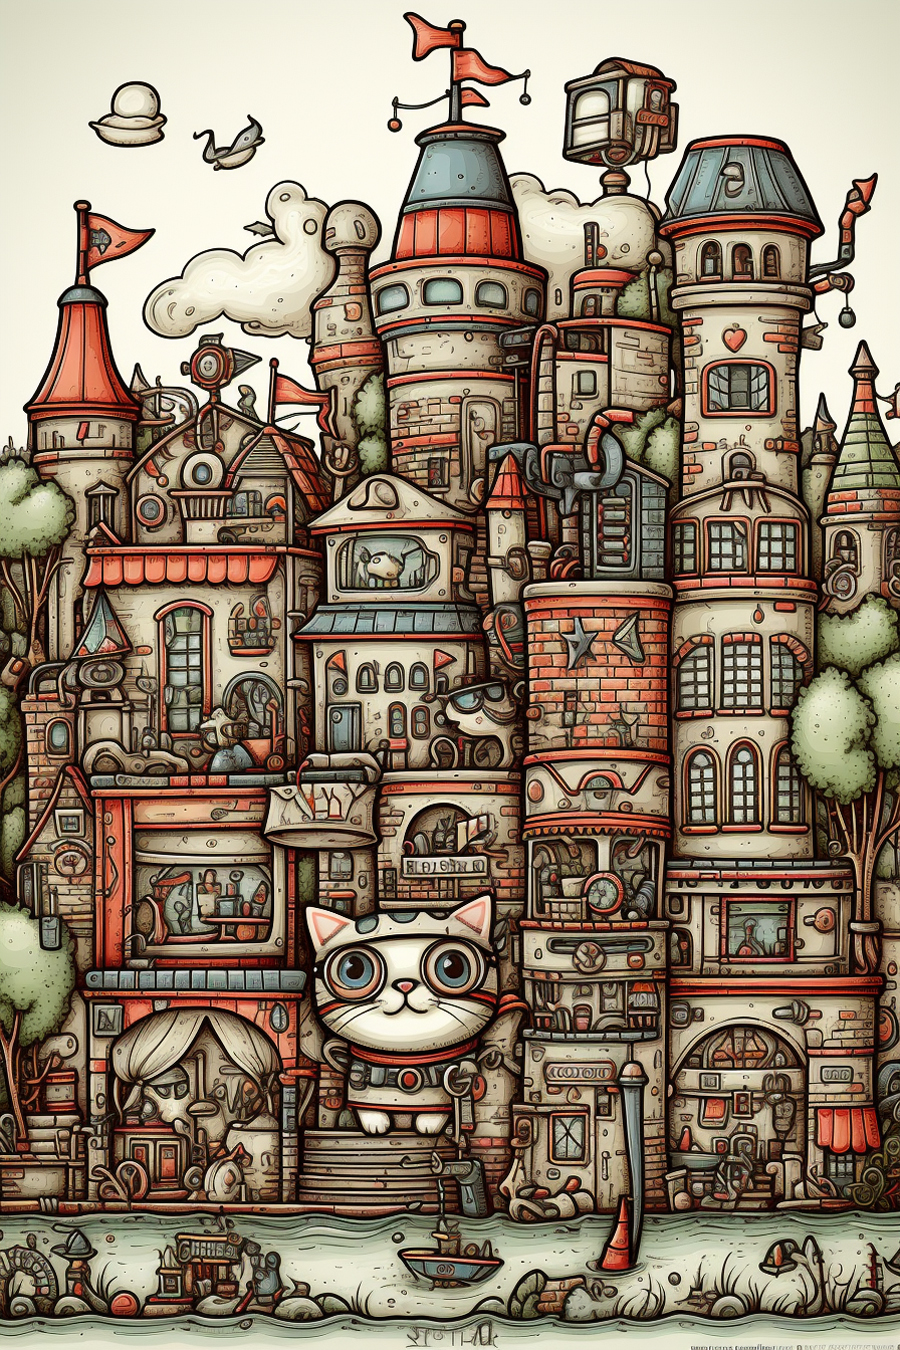 A drawing of a castle with a cat in it.